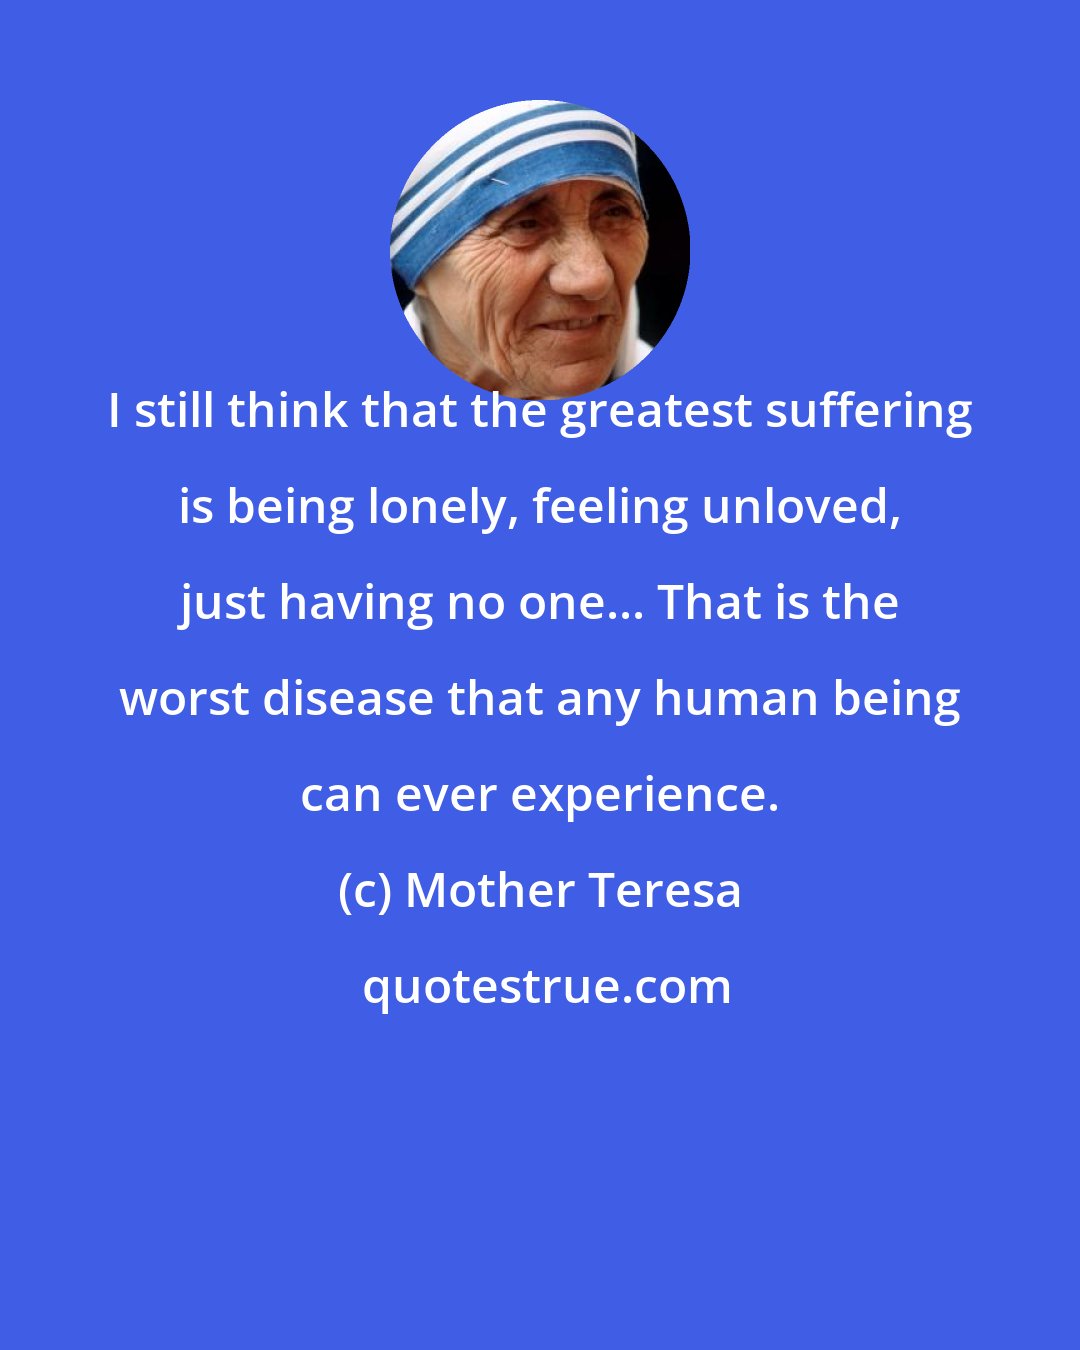 Mother Teresa: I still think that the greatest suffering is being lonely, feeling unloved, just having no one... That is the worst disease that any human being can ever experience.